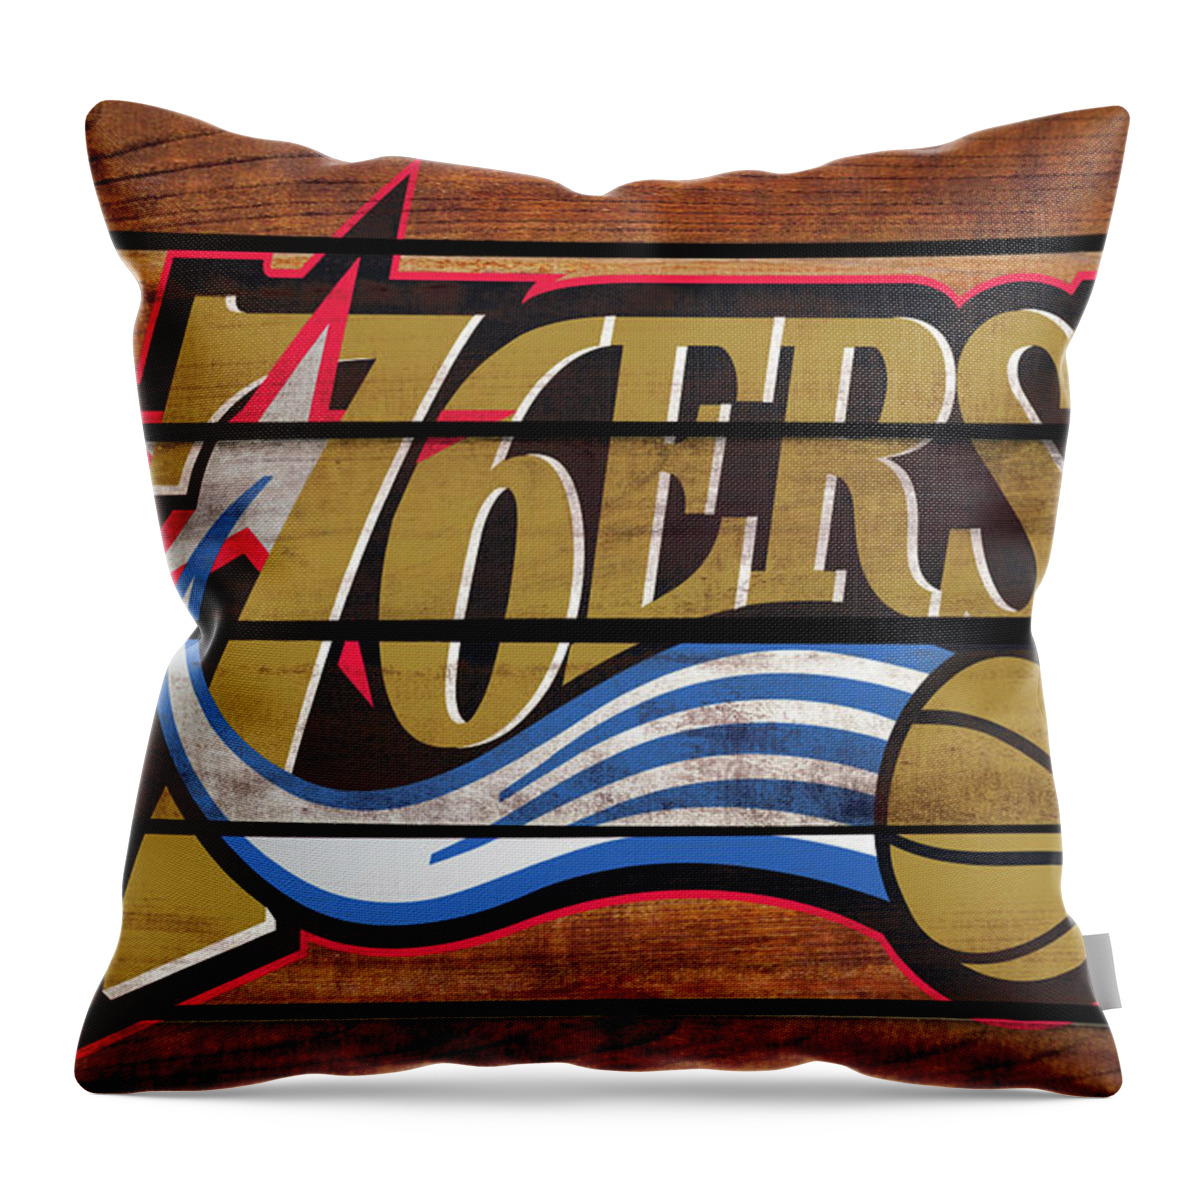 Philadelphia 76ers Throw Pillow featuring the mixed media Philadelphia 76ers 1a by Brian Reaves